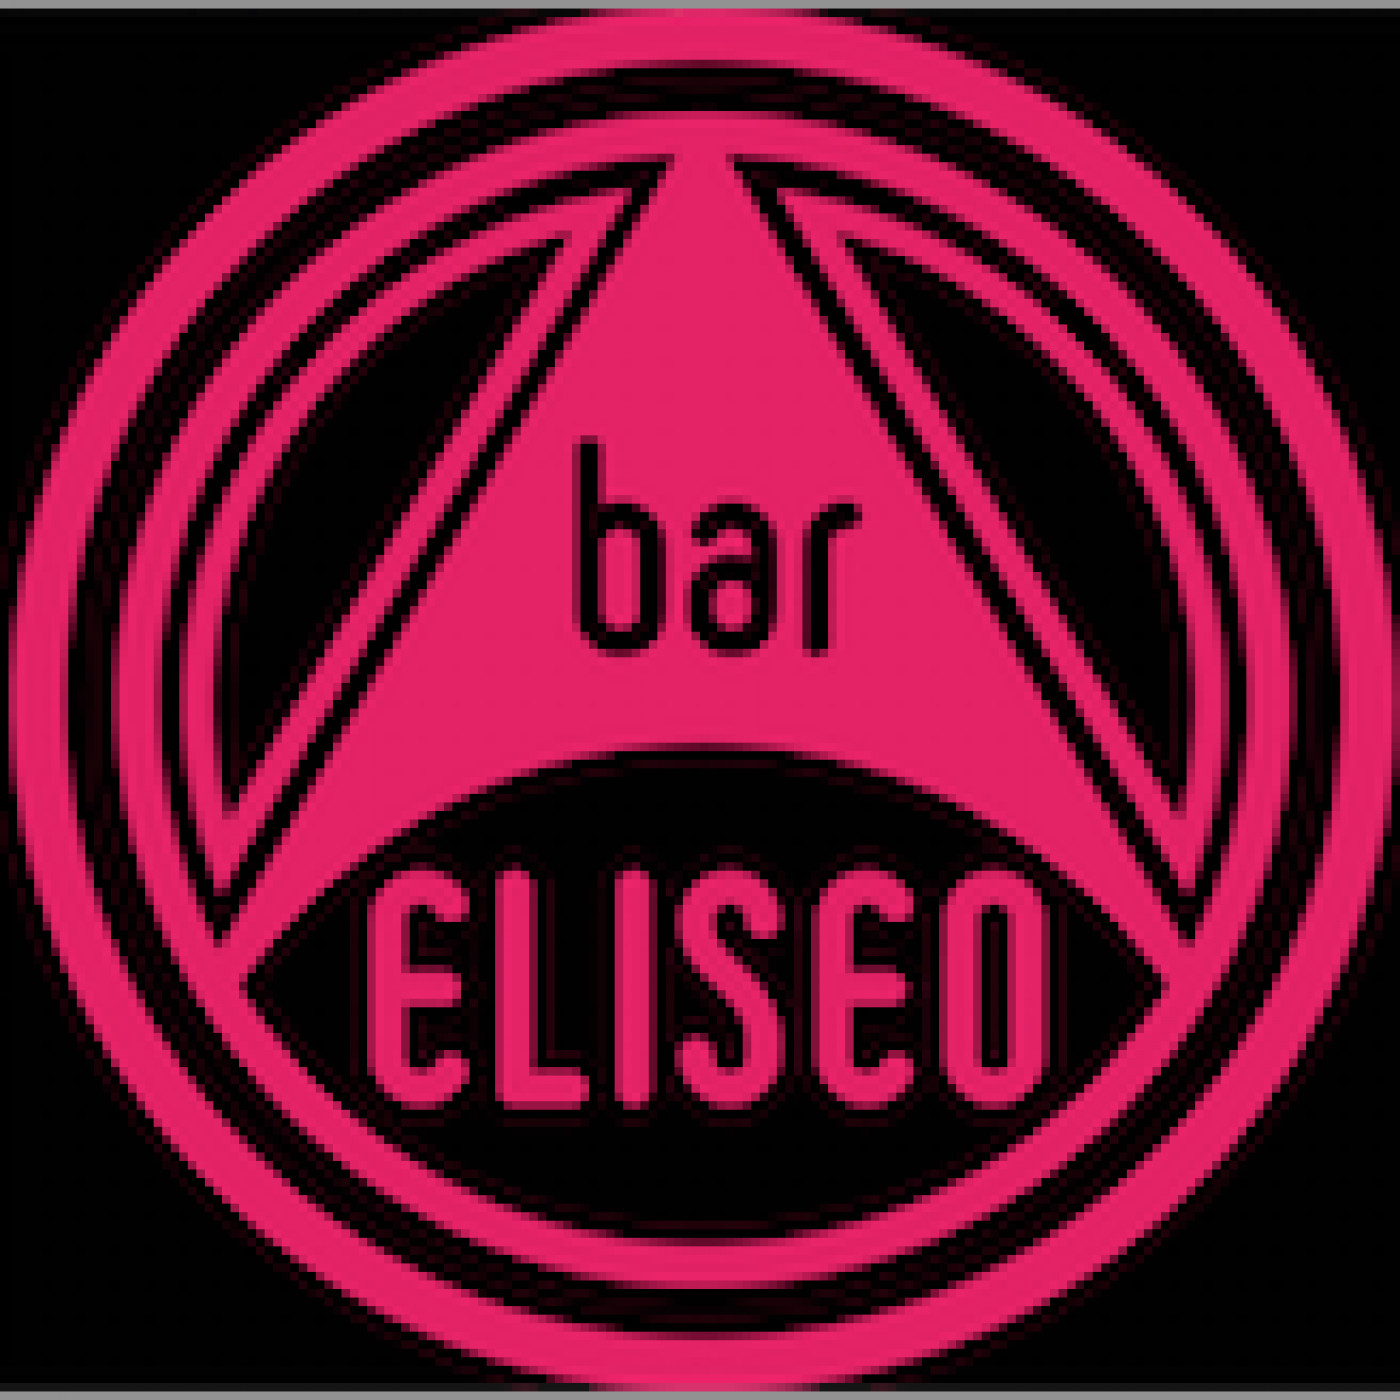 BAR ELISEO · 2016 is comming · #Angel Deep Podcast#